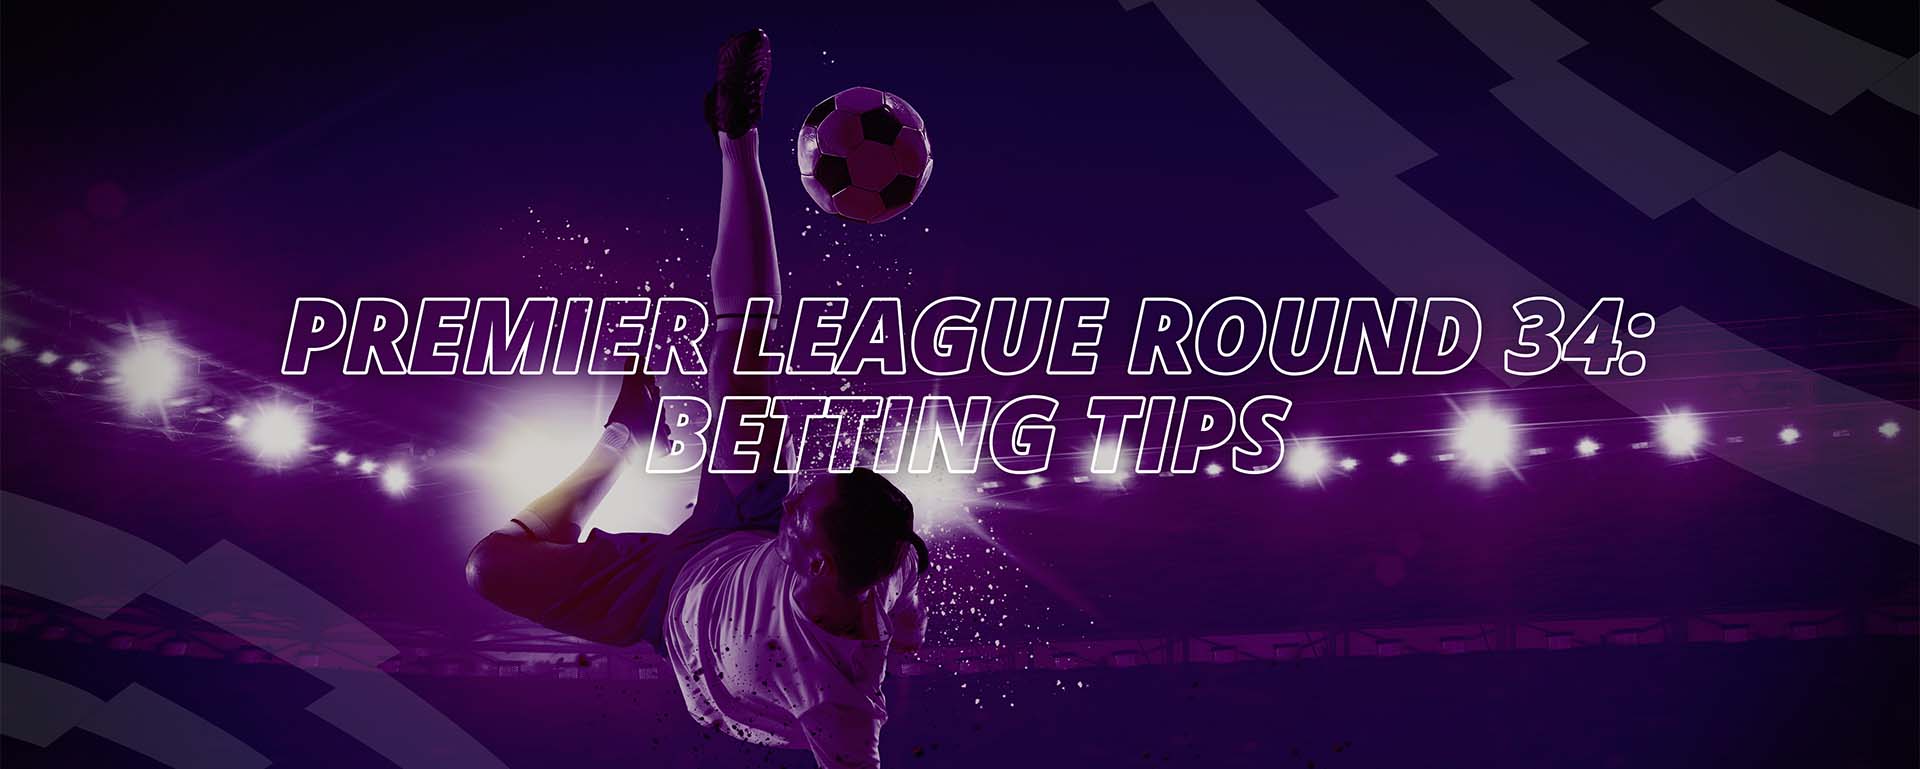 PREMIER LEAGUE ROUND 34: BETTING TIPS